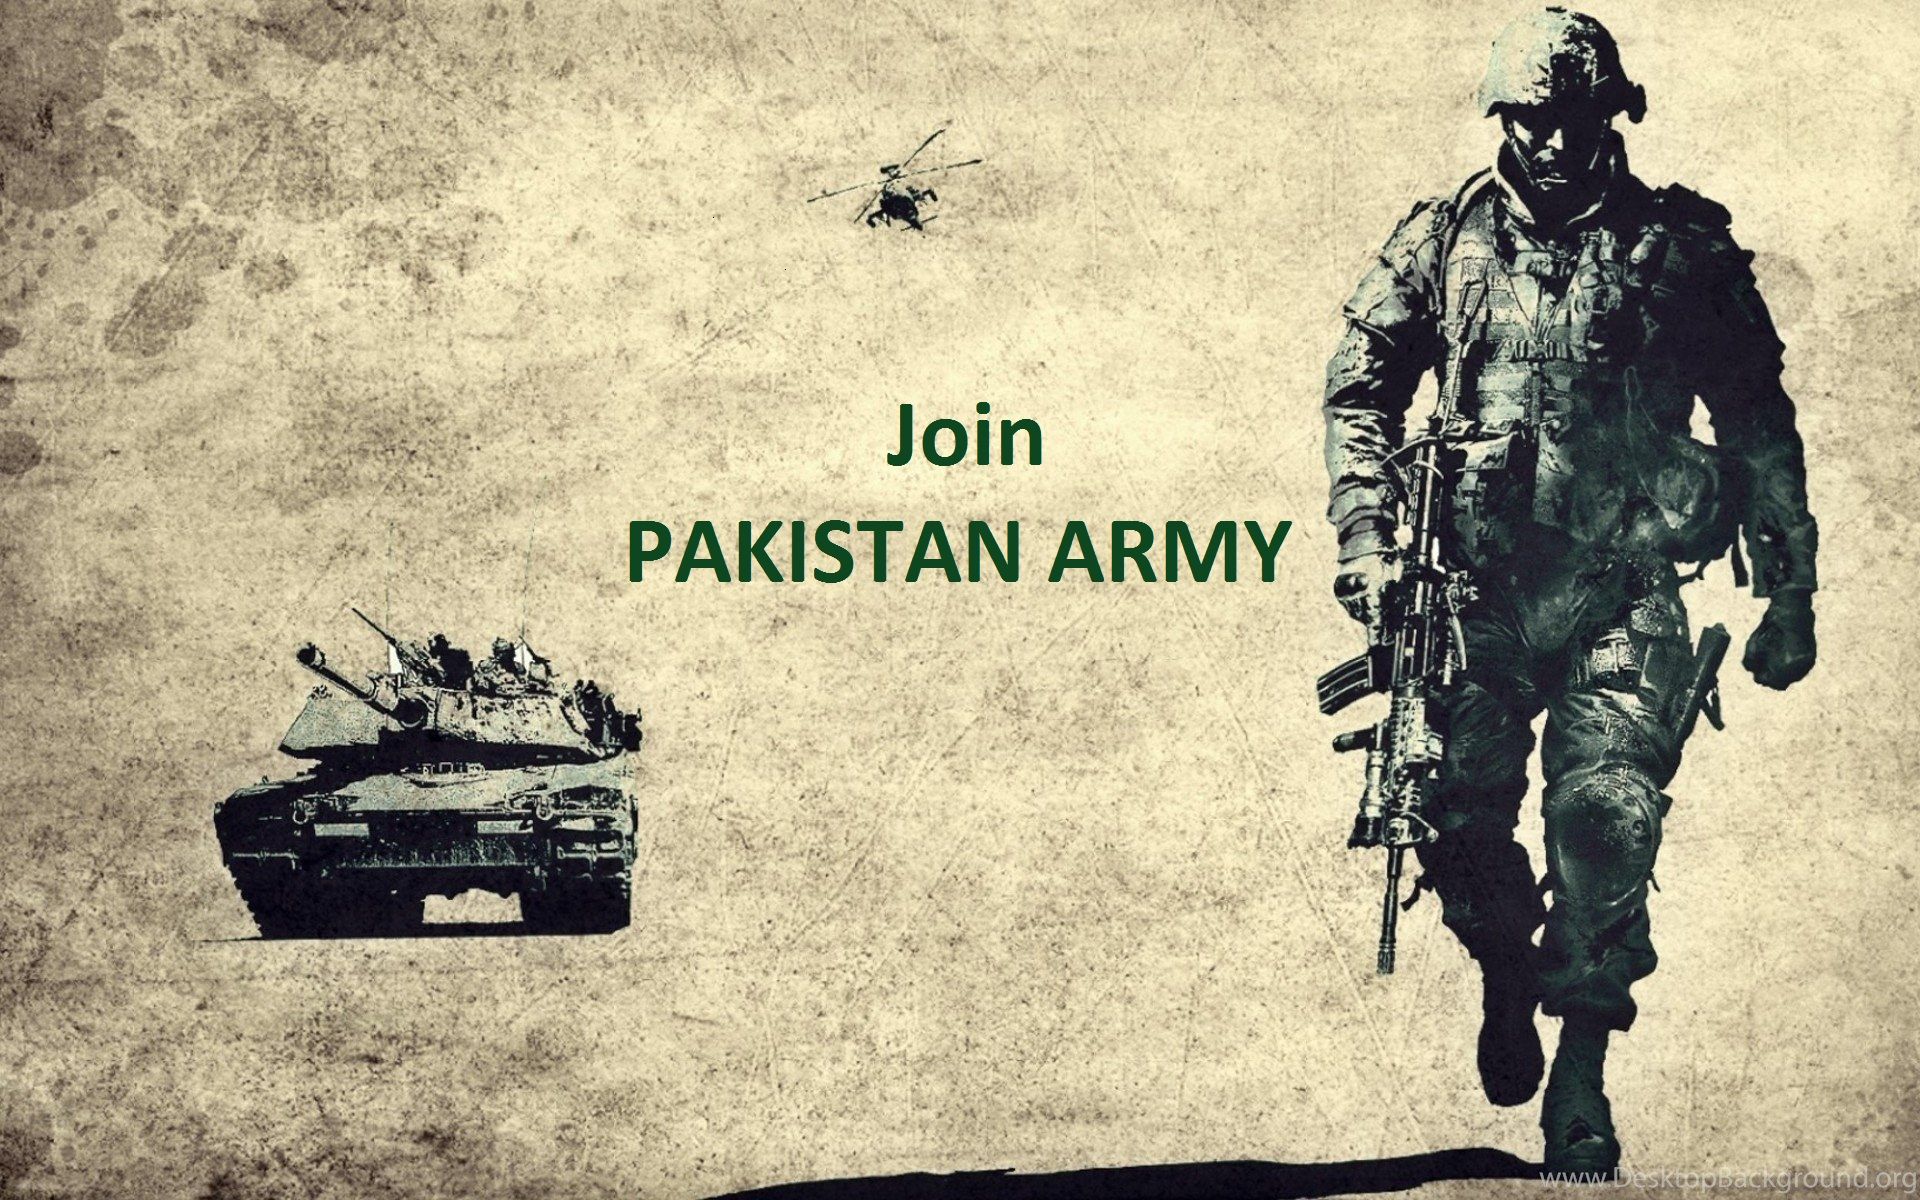 Join Pak Army As Soldier. Army wallpaper, Military wallpaper, Army pics